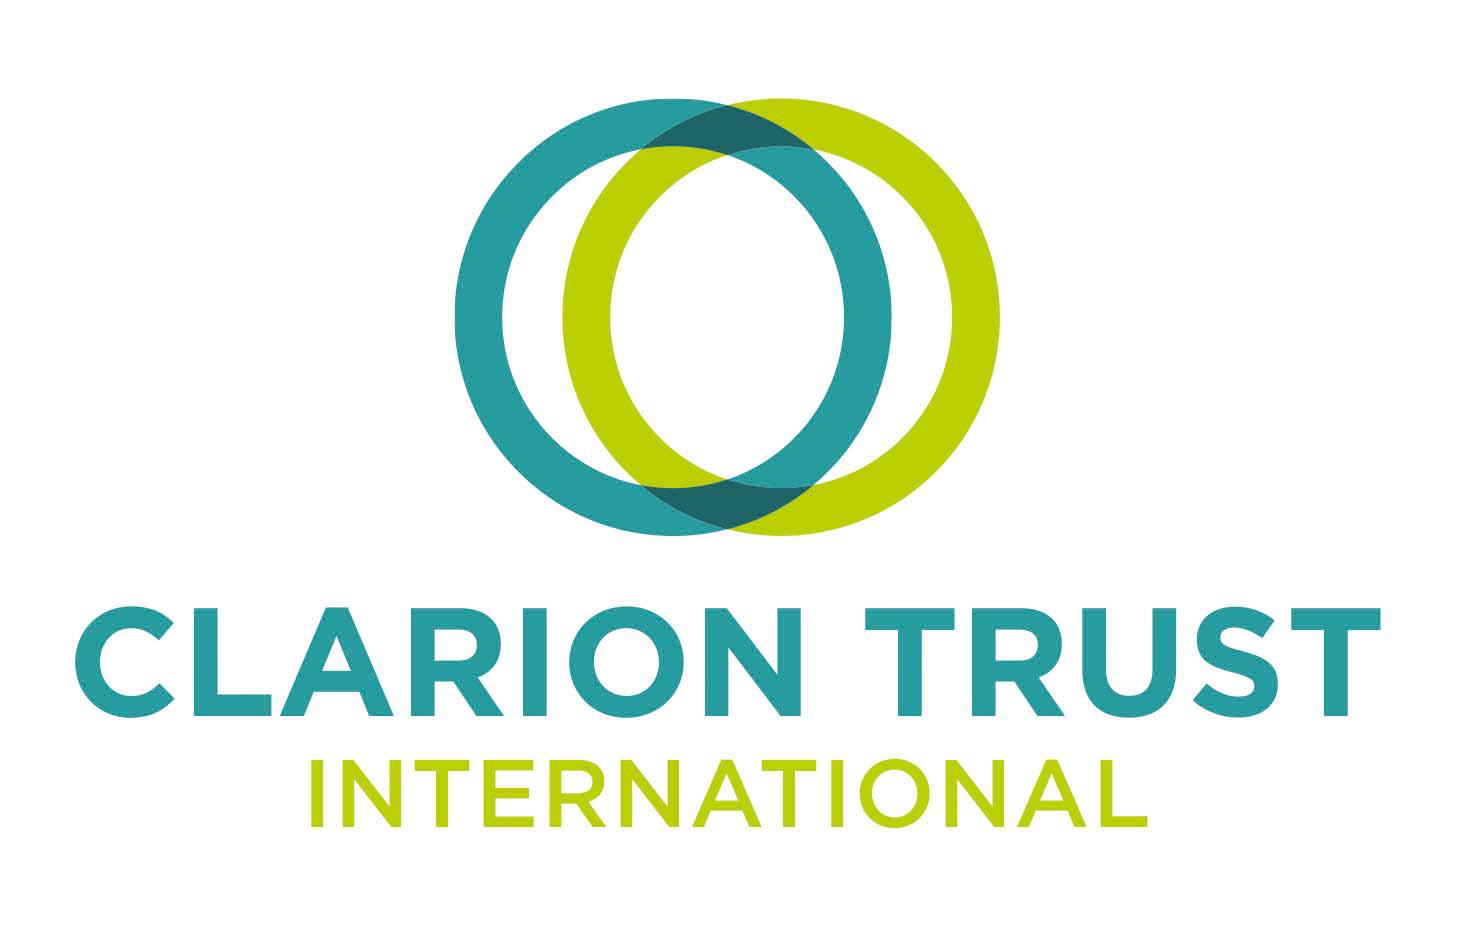 A Clarion Trust International Tour to Israel